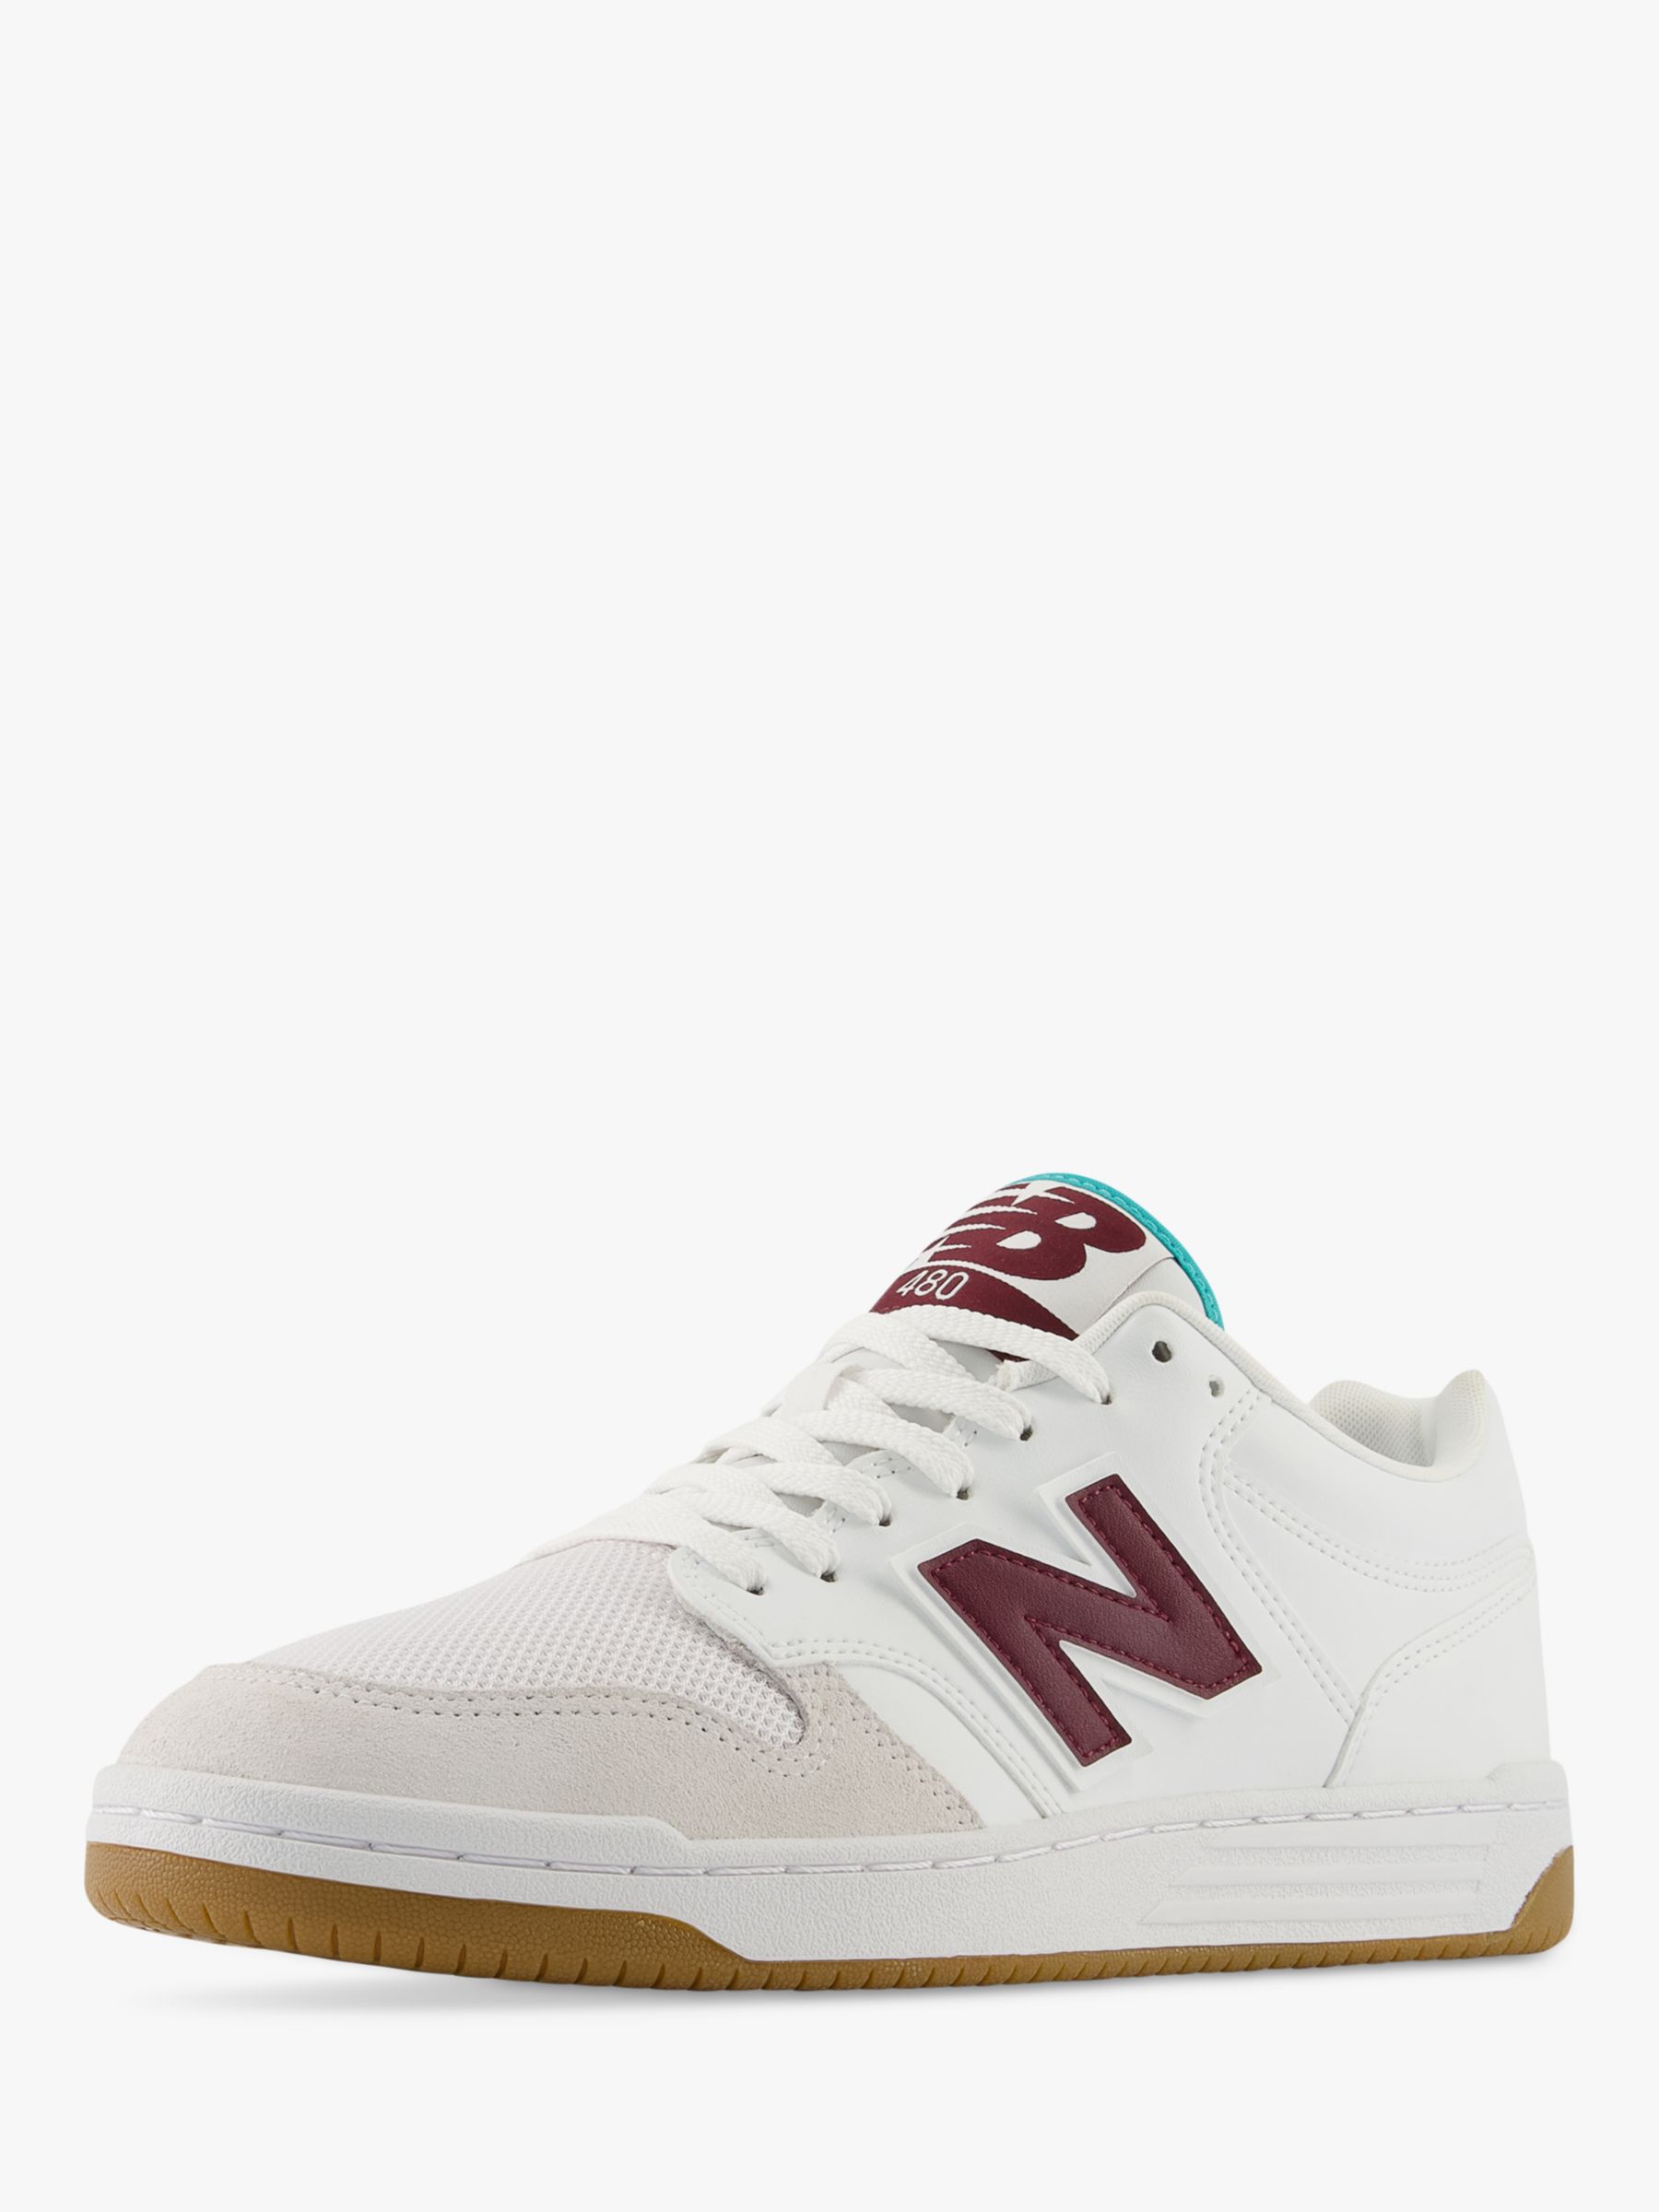 Buy New Balance BB480 Trainers, White/Black Online at johnlewis.com